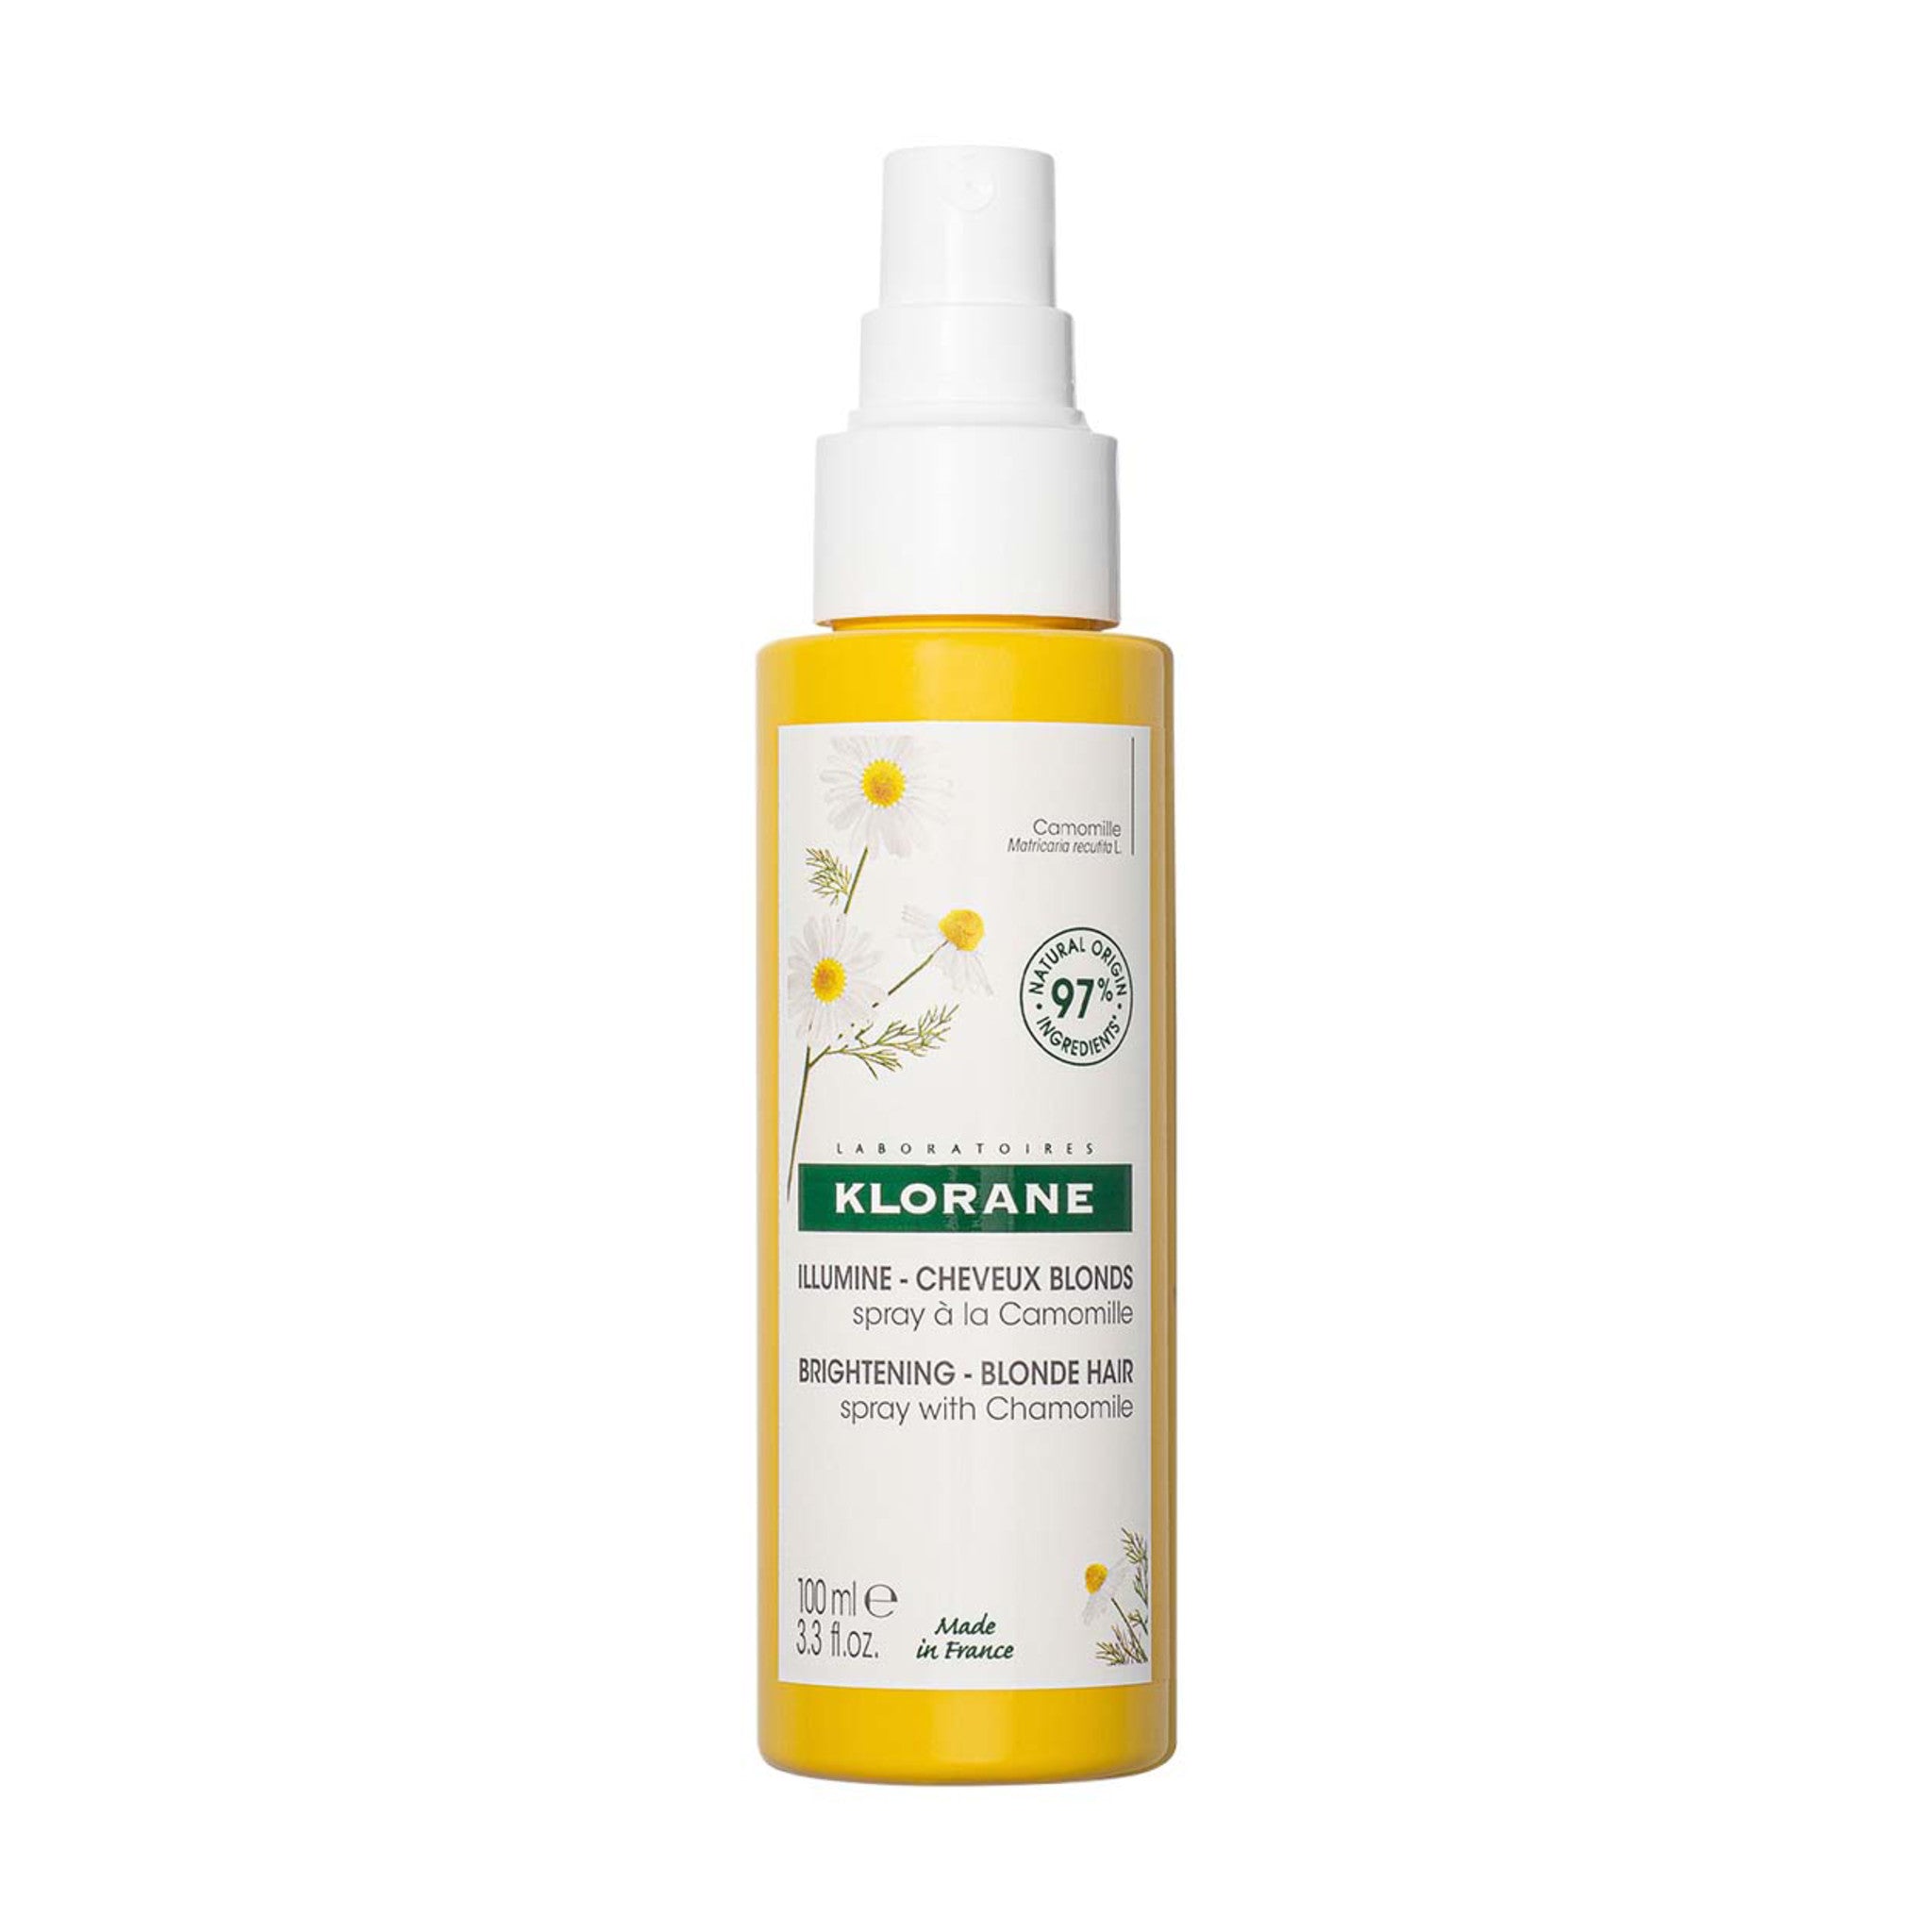 Klorane Brightening Spray with Chamomile main image. This product is for blonde hair